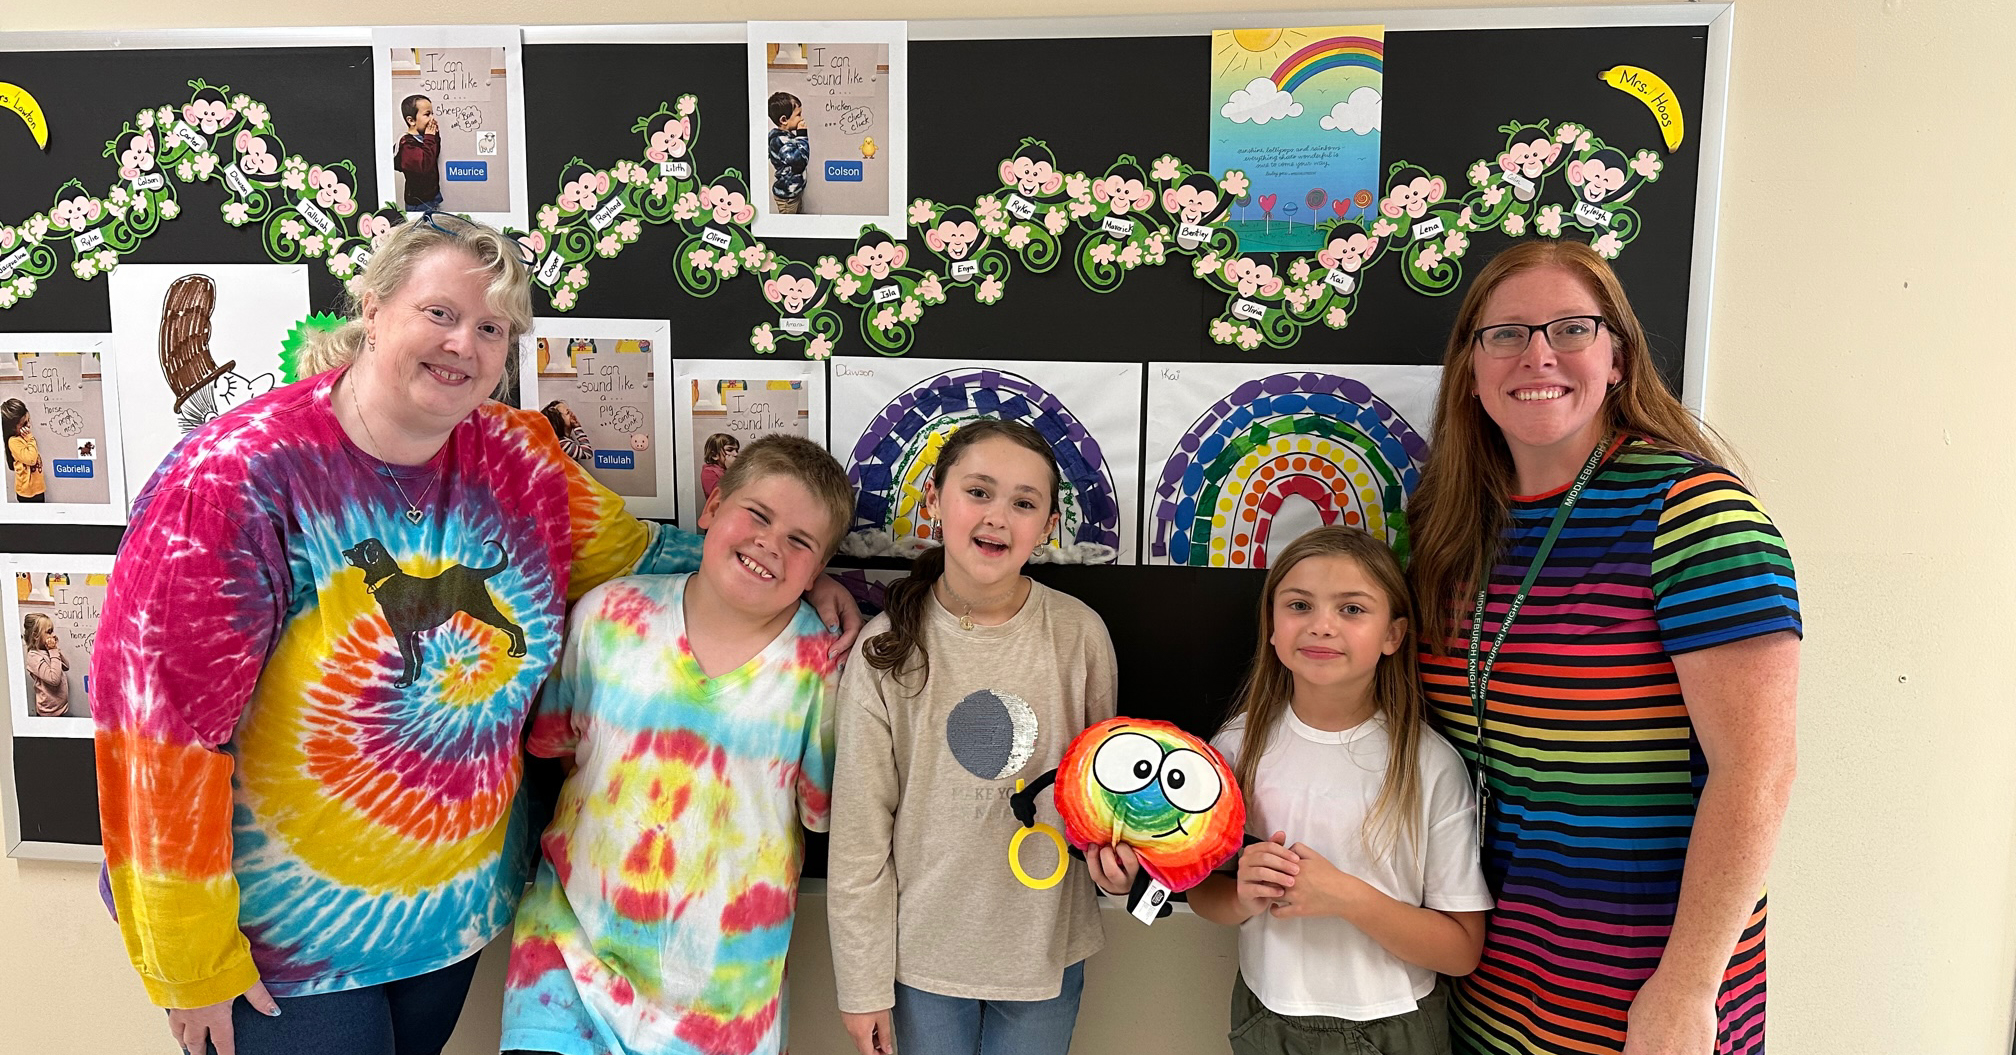 Students and teachers dressed in rainbow clothing.